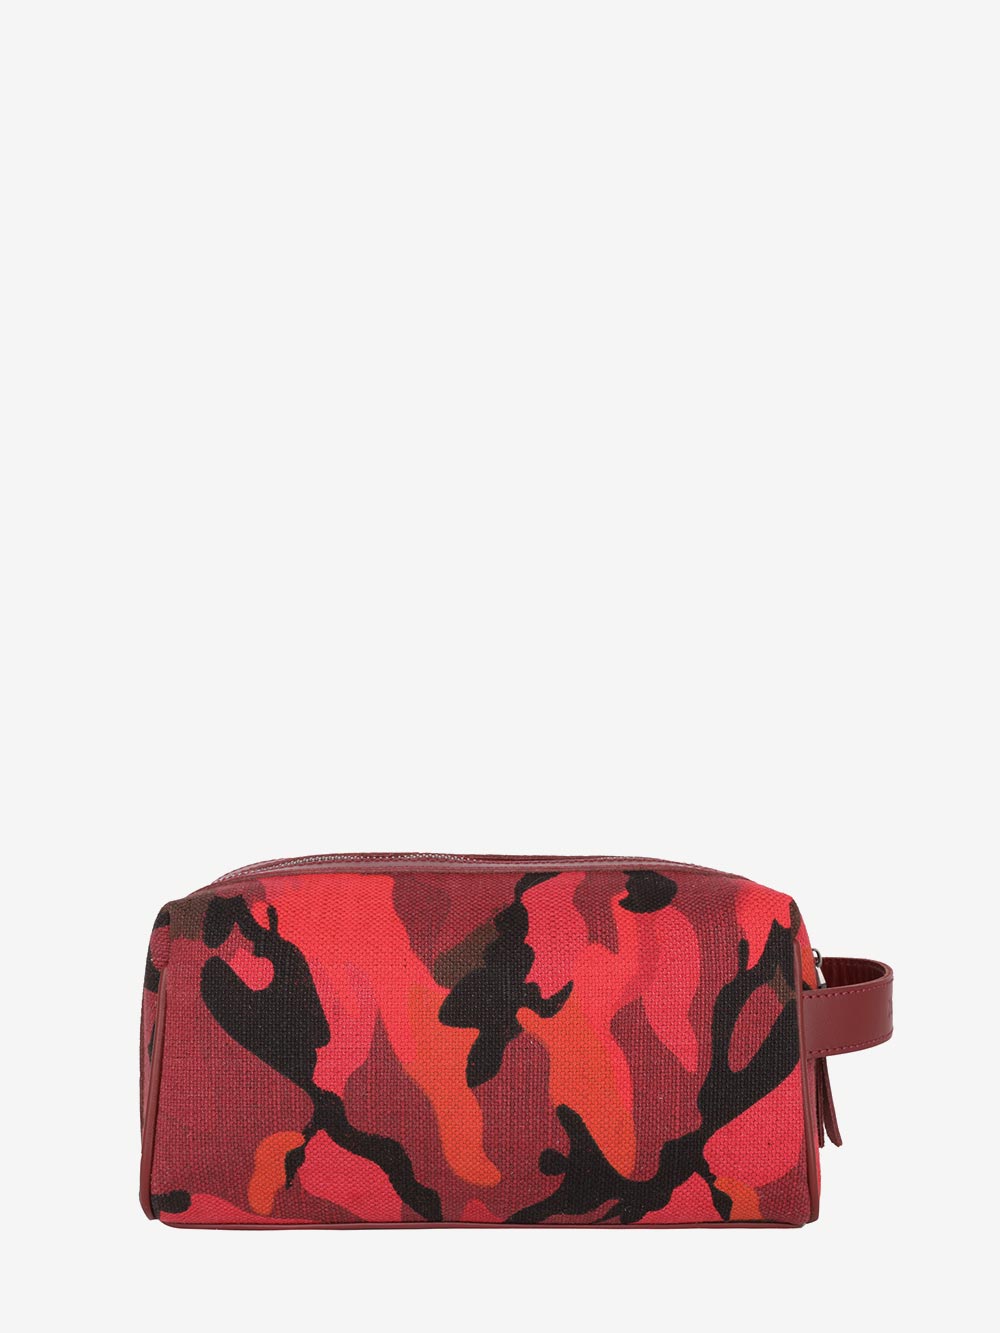 Montana West Camouflage Multi Purpose Travel Pouch - Montana West World